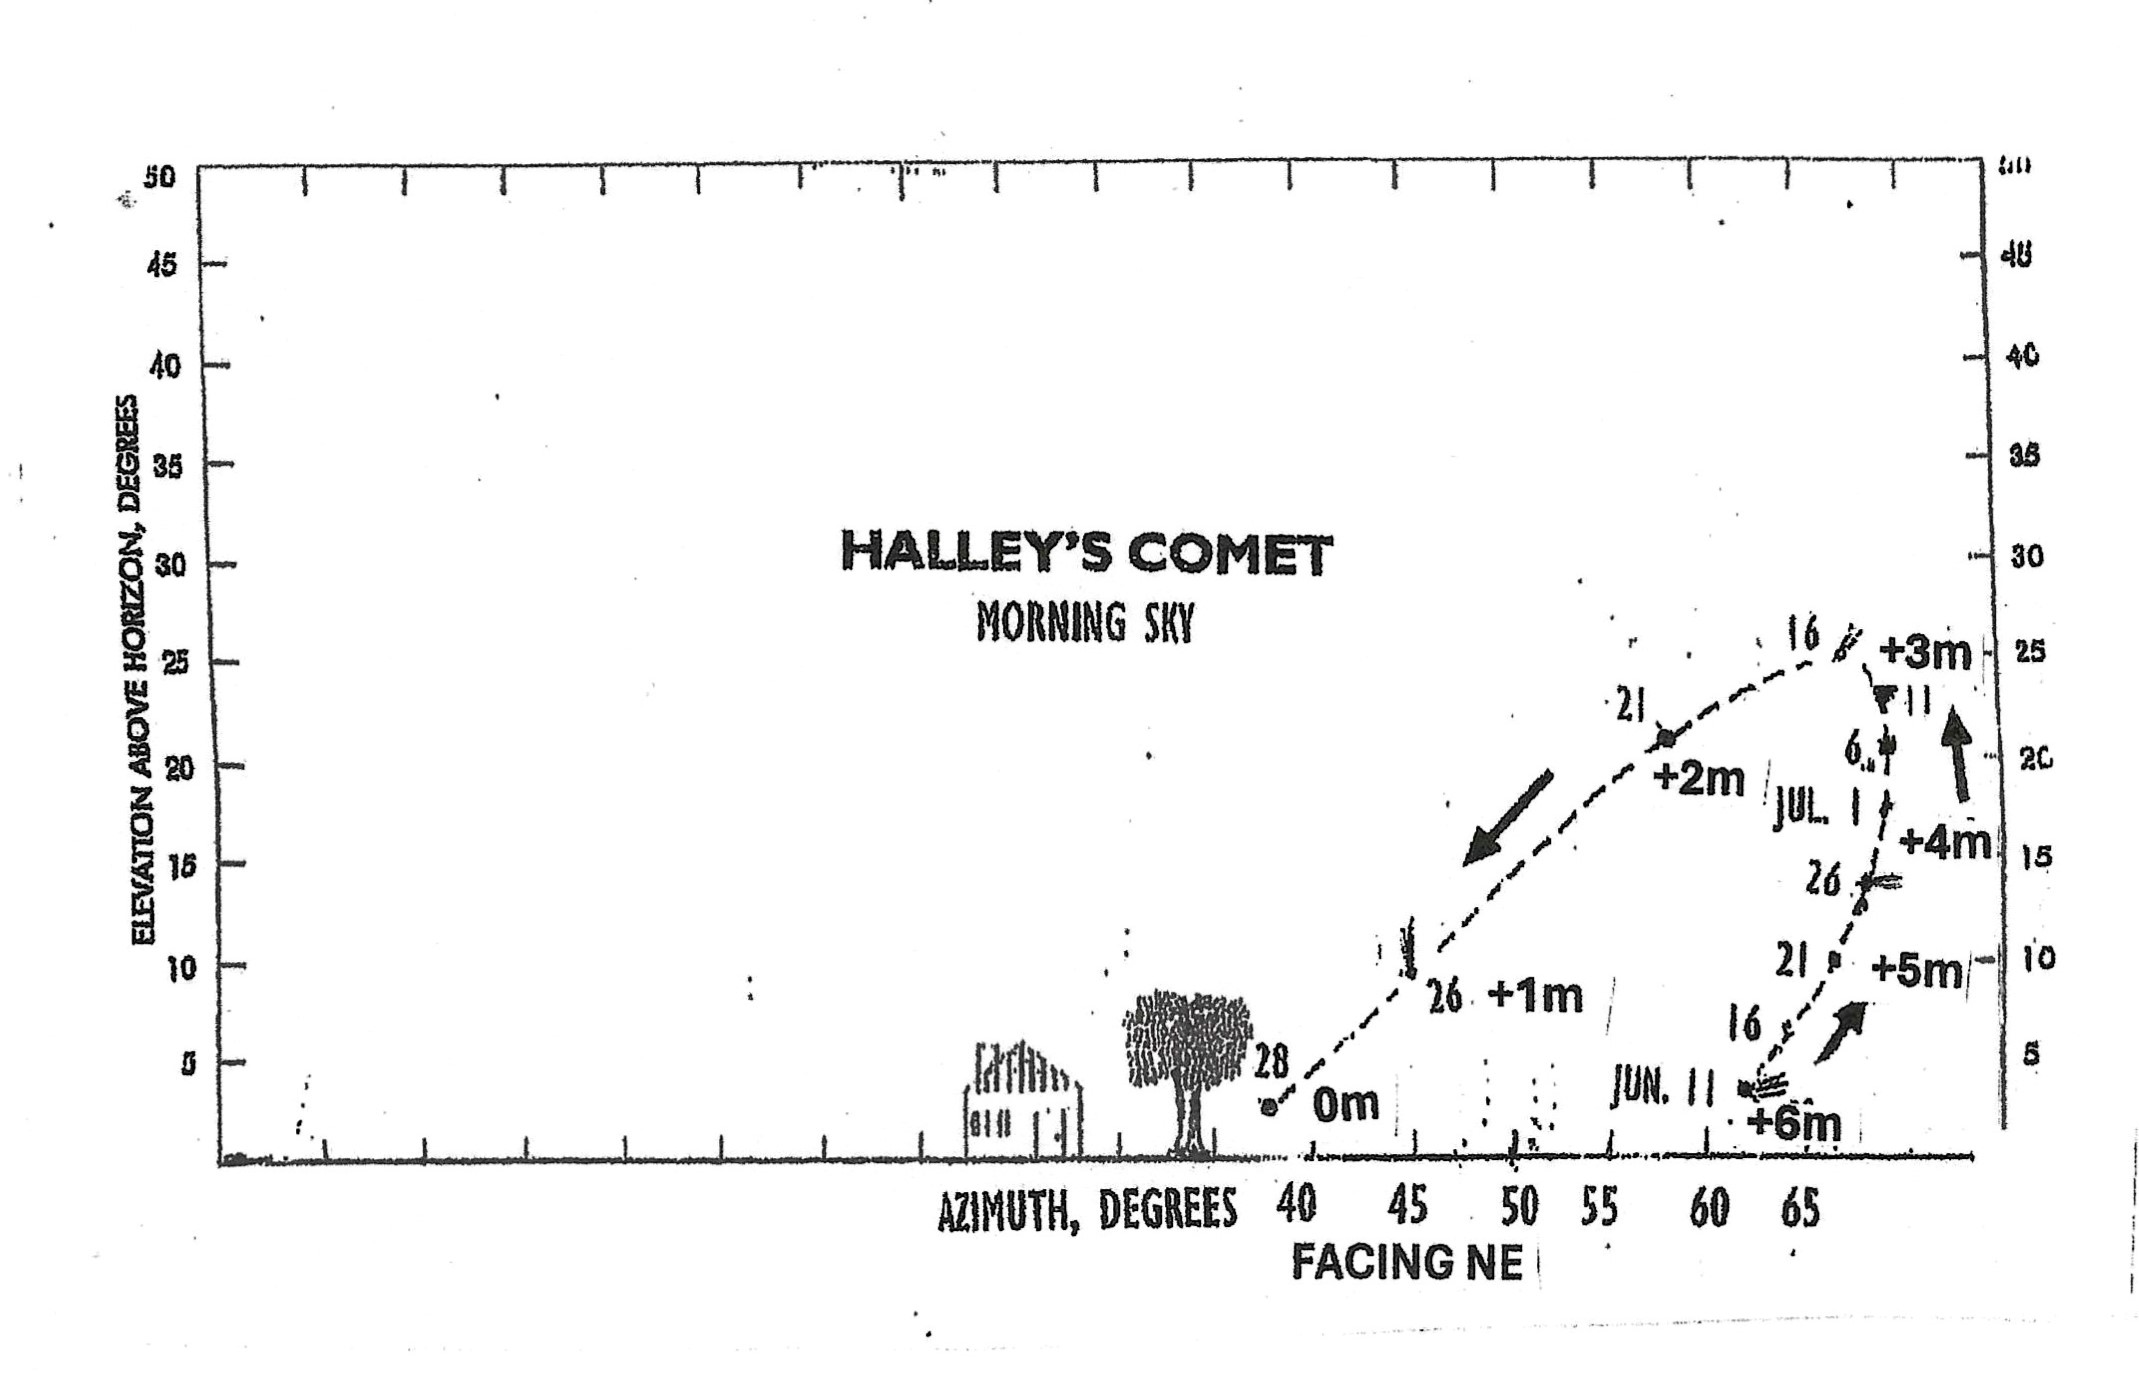 A chart showing when Halley's Comet will be visible in the spring and summer of 2061